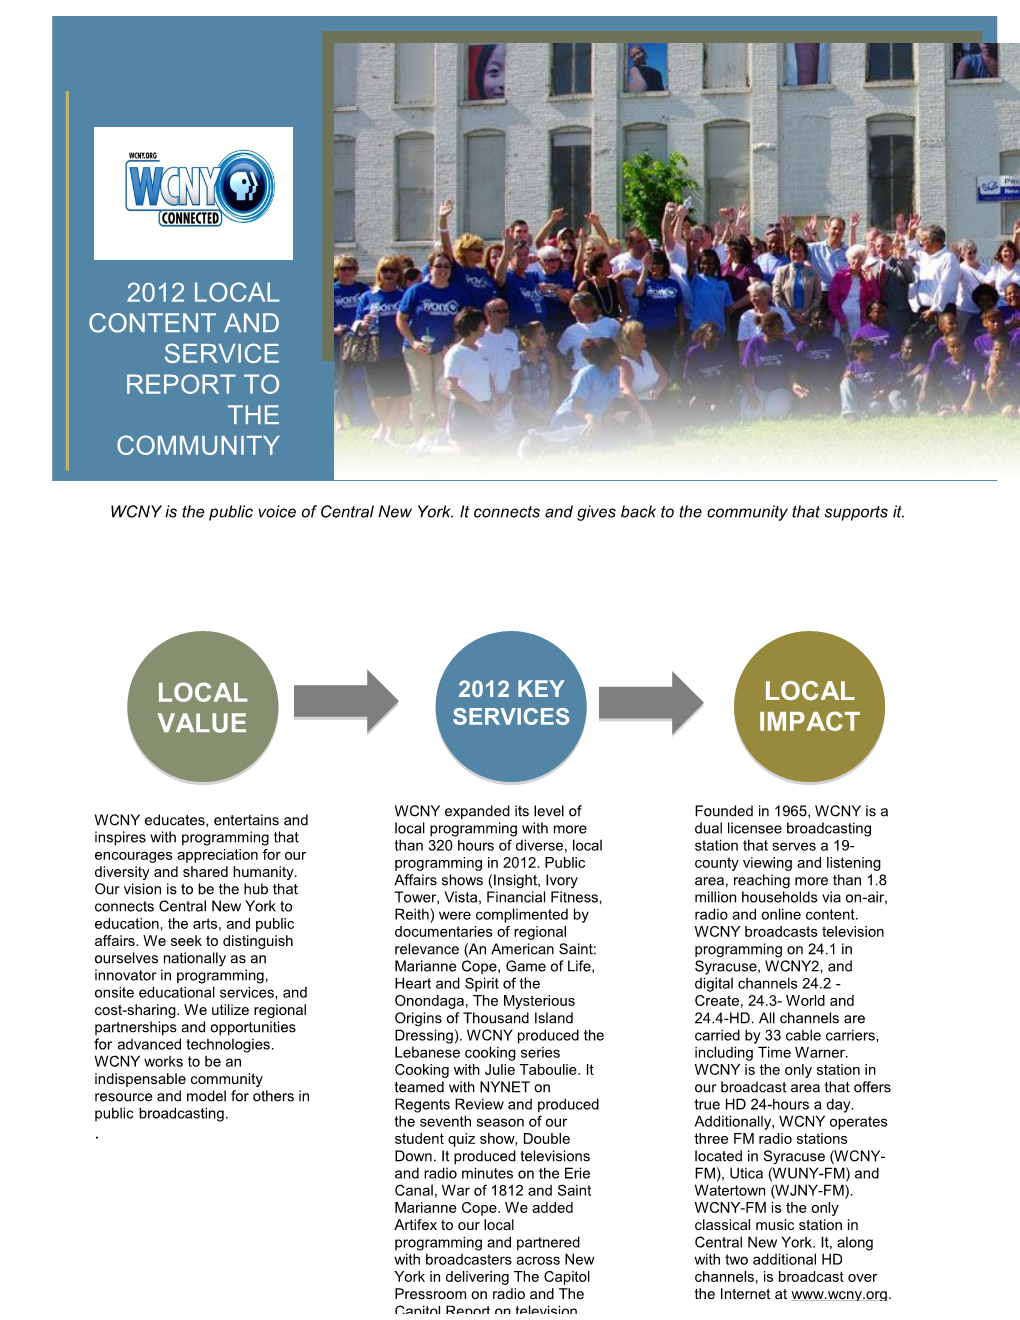 2012 Local Content and Service Report To